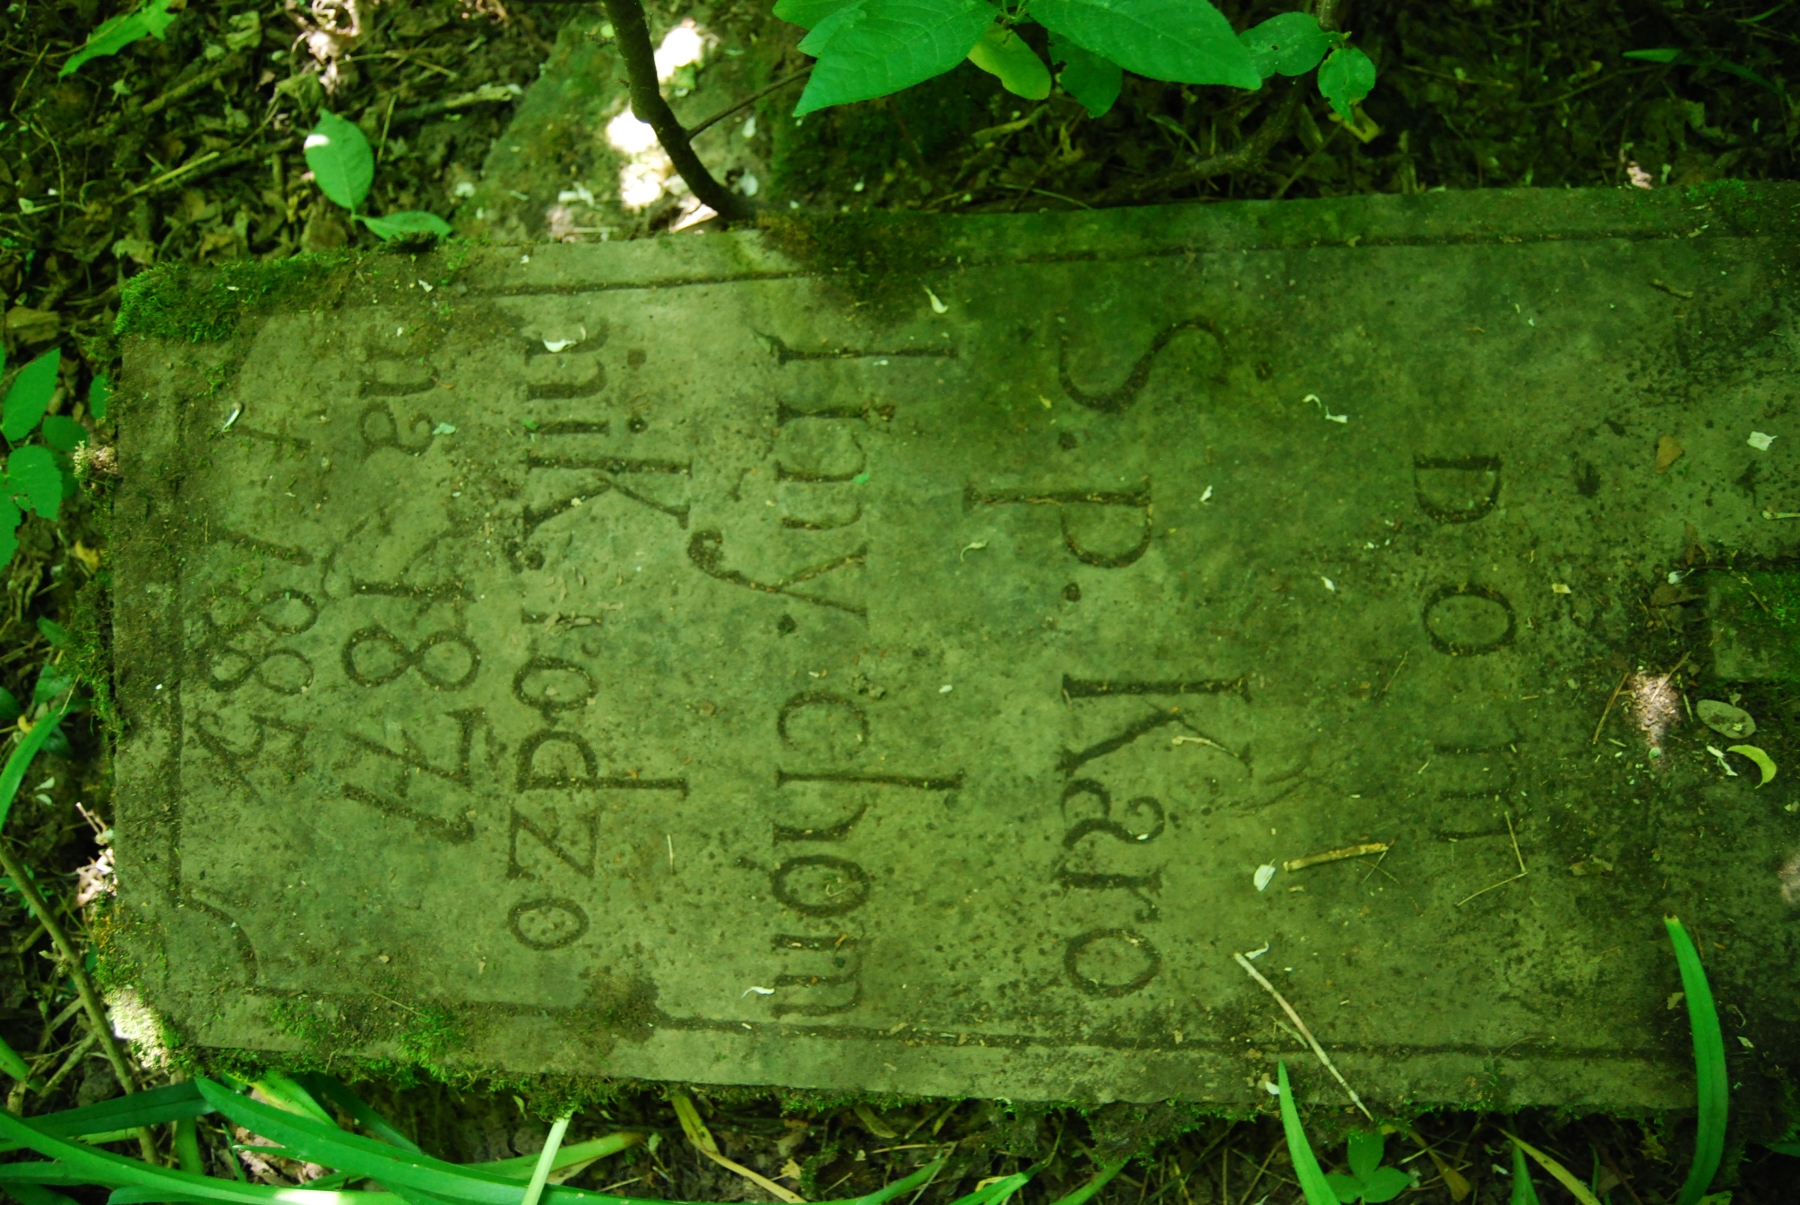 Inscription from the tombstone of Karolina Chomnik, Bucniowie cemetery